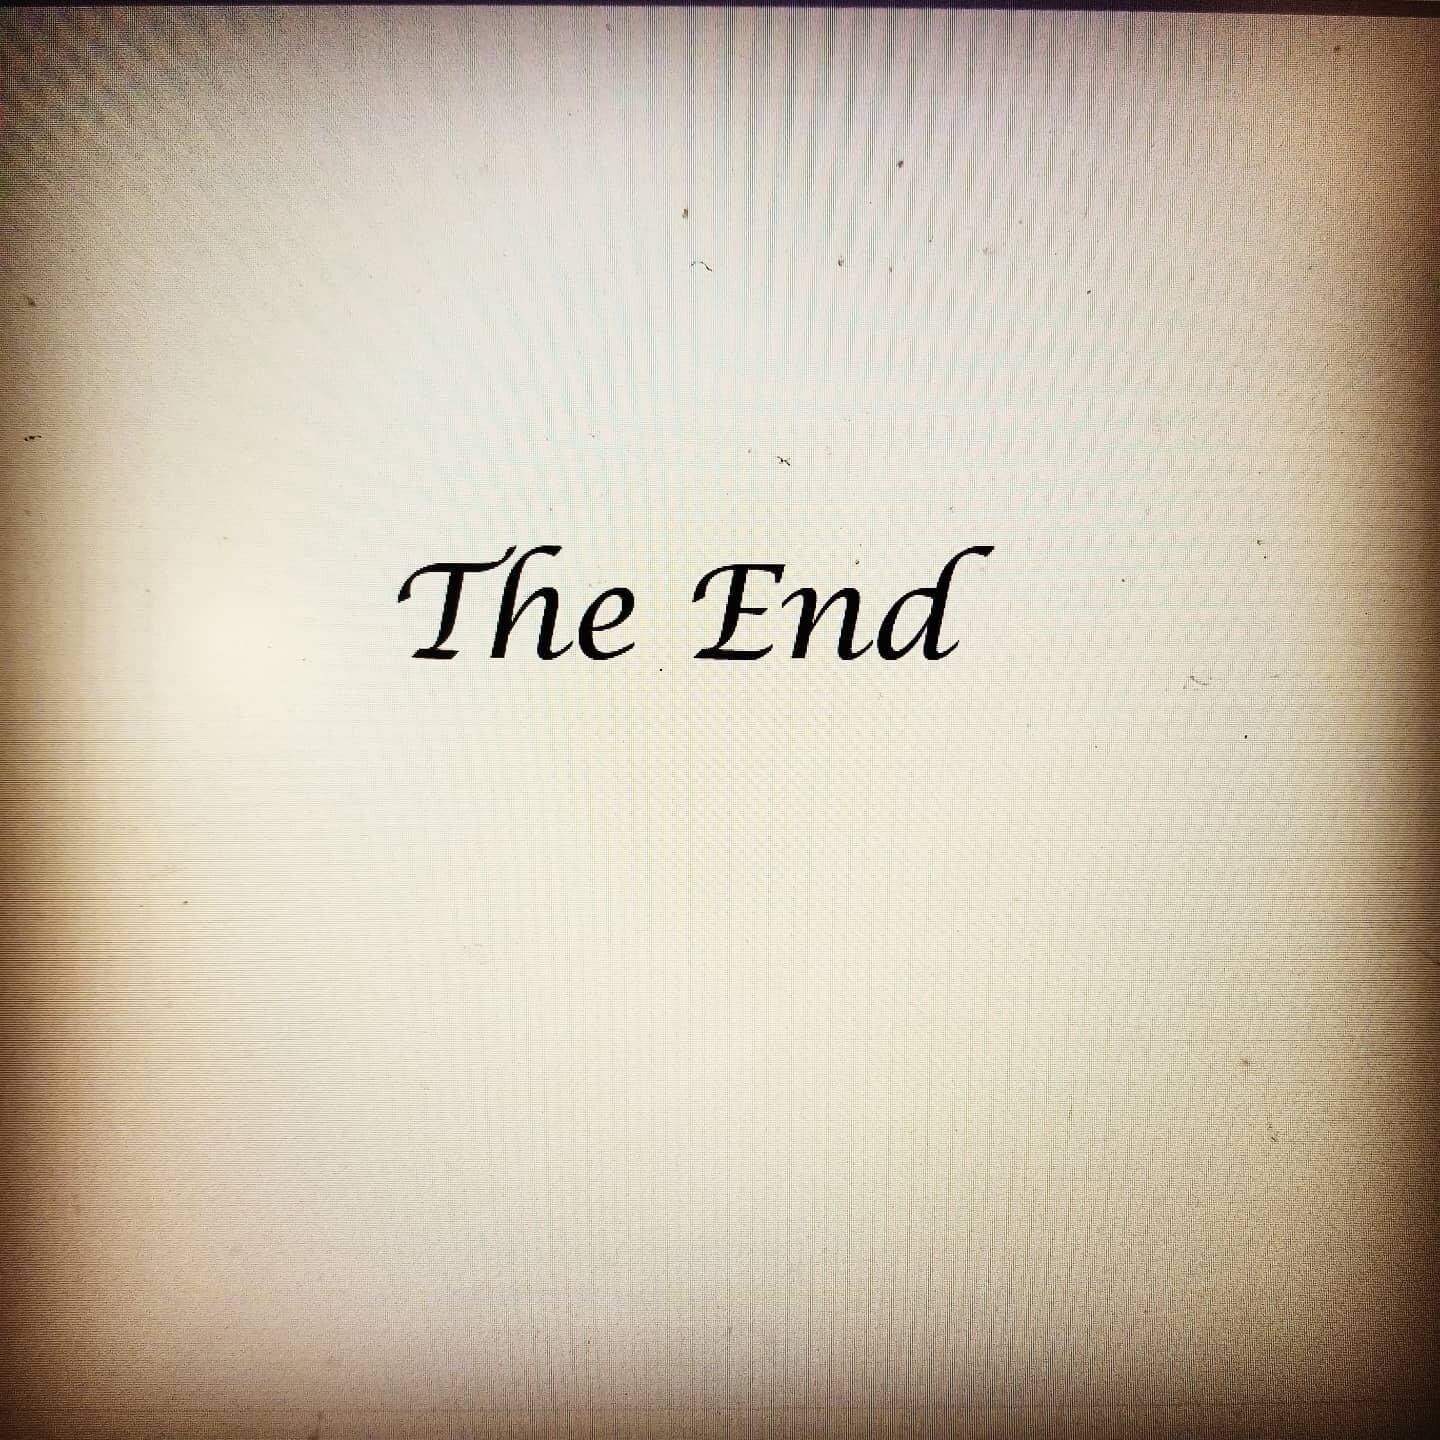 The sweetest words after giving everything to your characters.  Rough draft of book 3 in the Vineyard Seeds Series completed.  Now the revision stage. 

#laboroflove 
#writingprocess
#ineedanap
#authorsofinstagram
#bigfatitalianfamily
#theend 
#chris